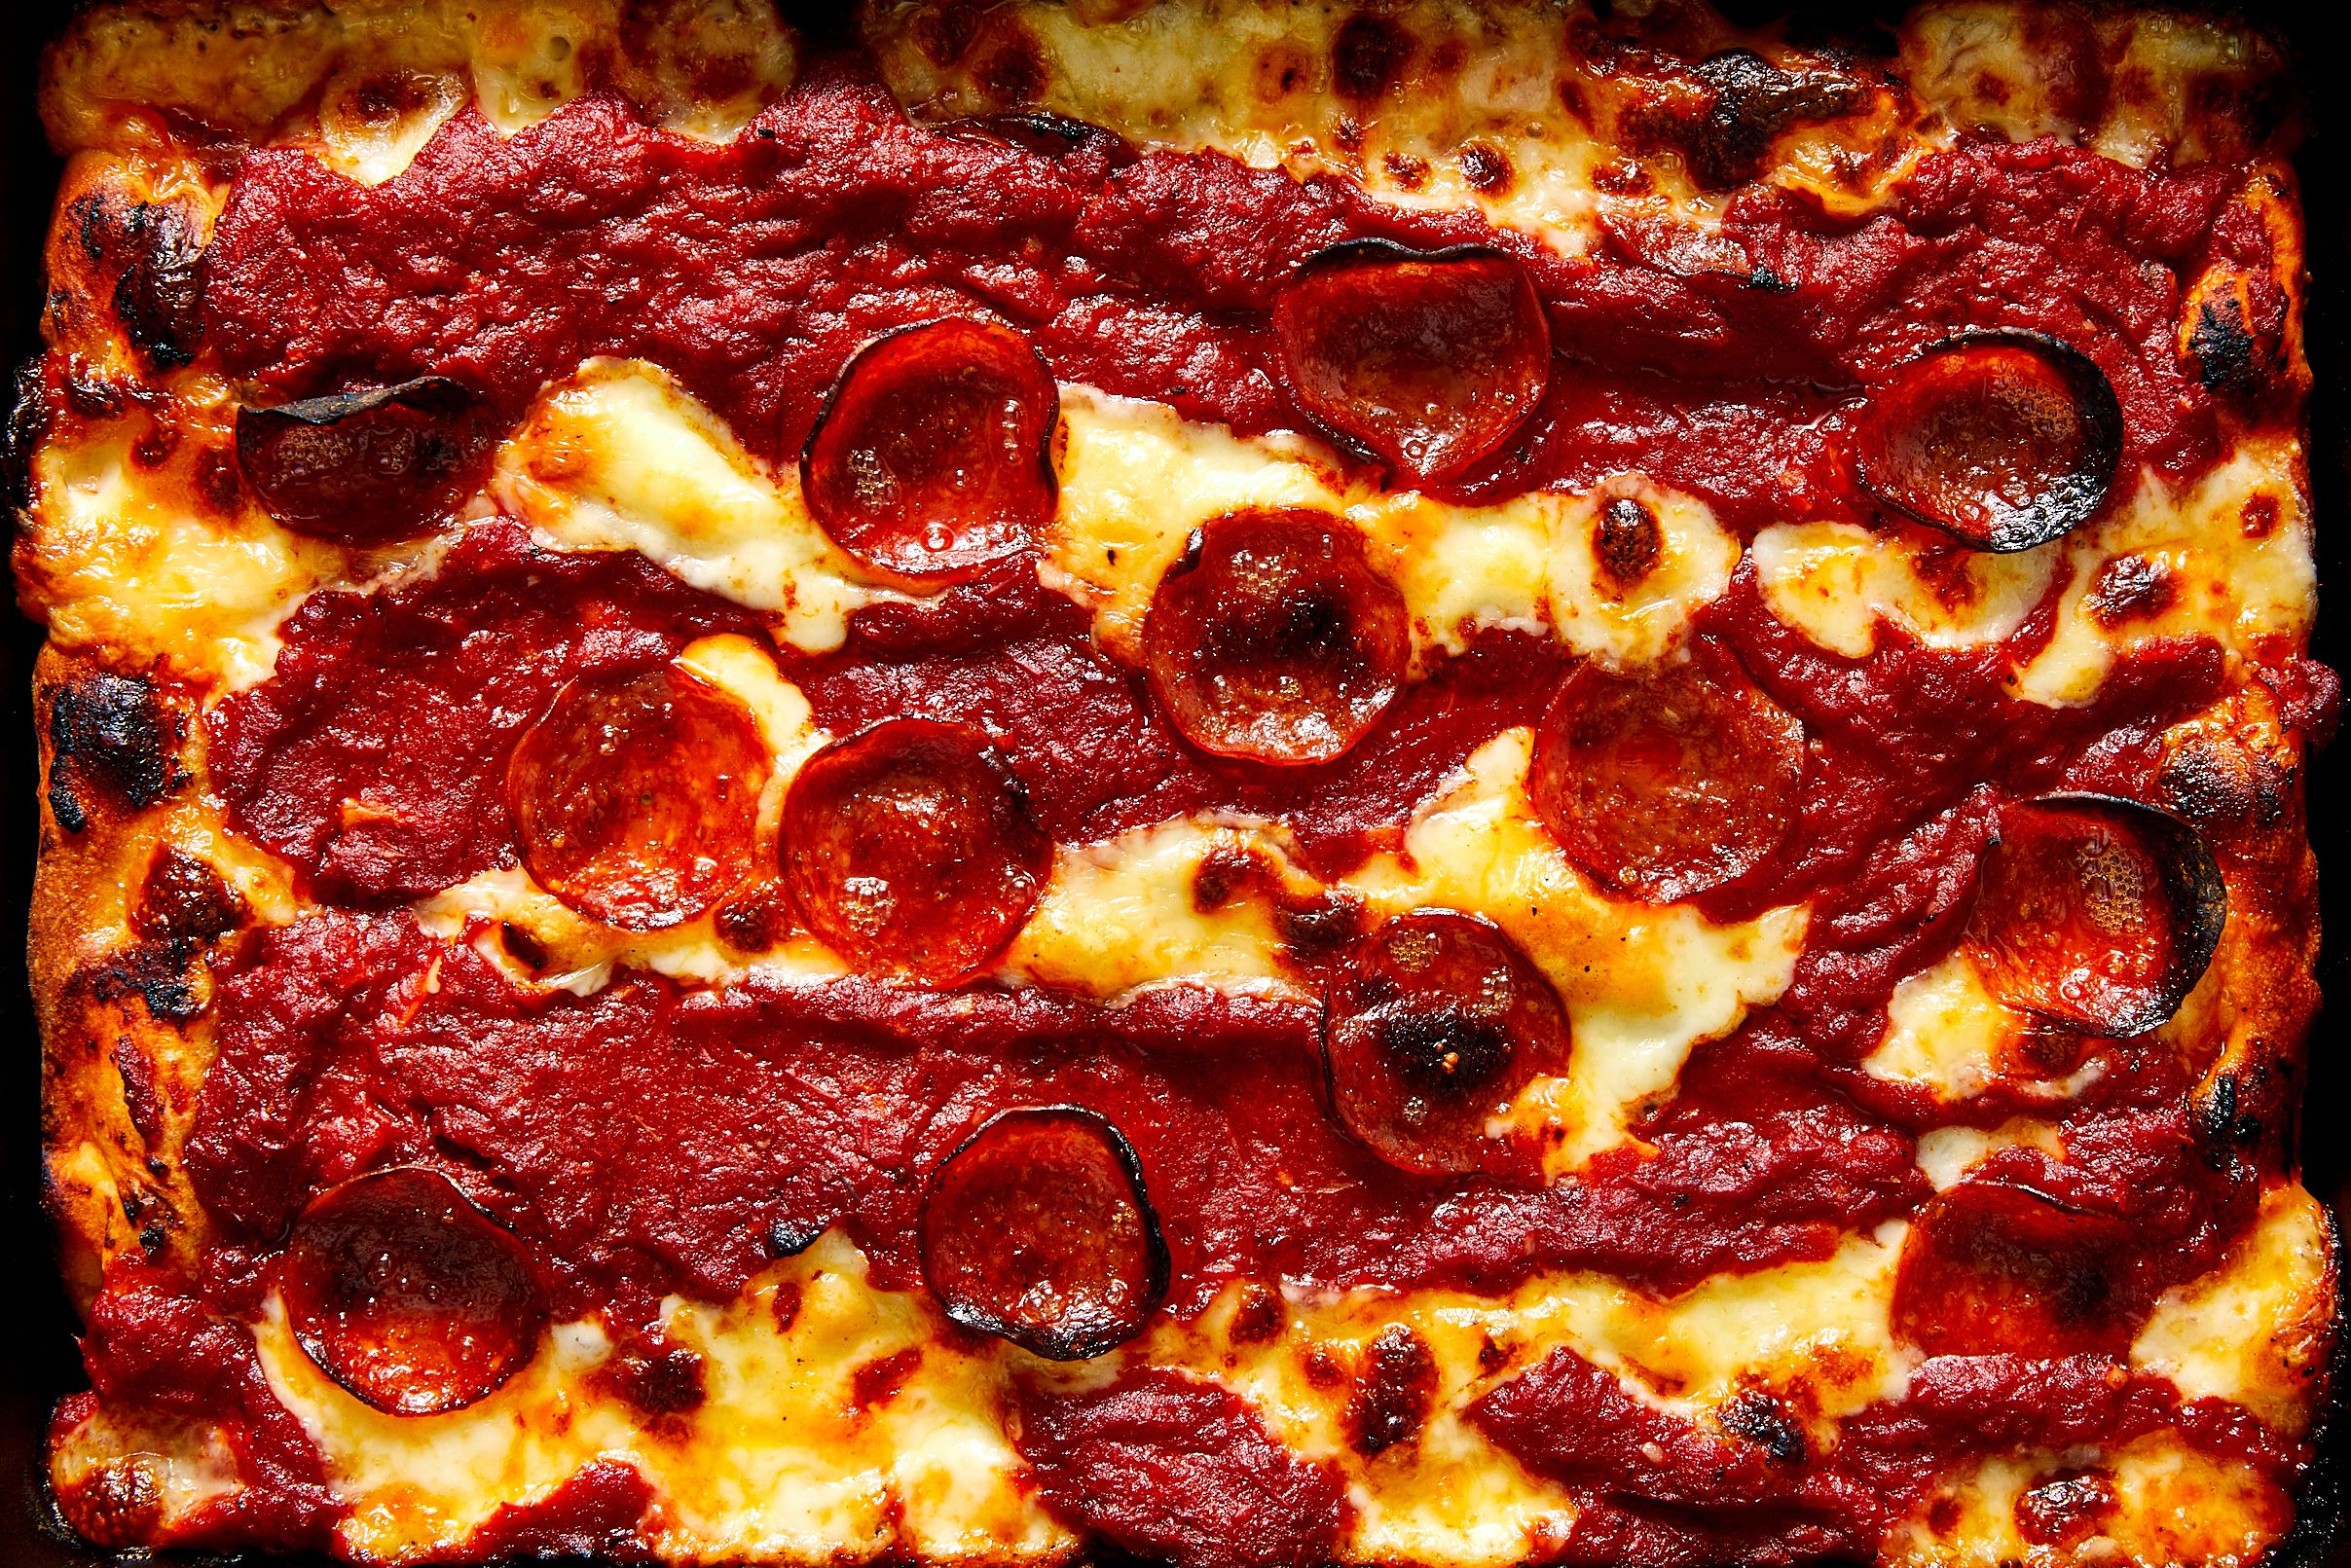 The Specialized Pan That Gives Detroit-Style Pizza Its Signature Crunch